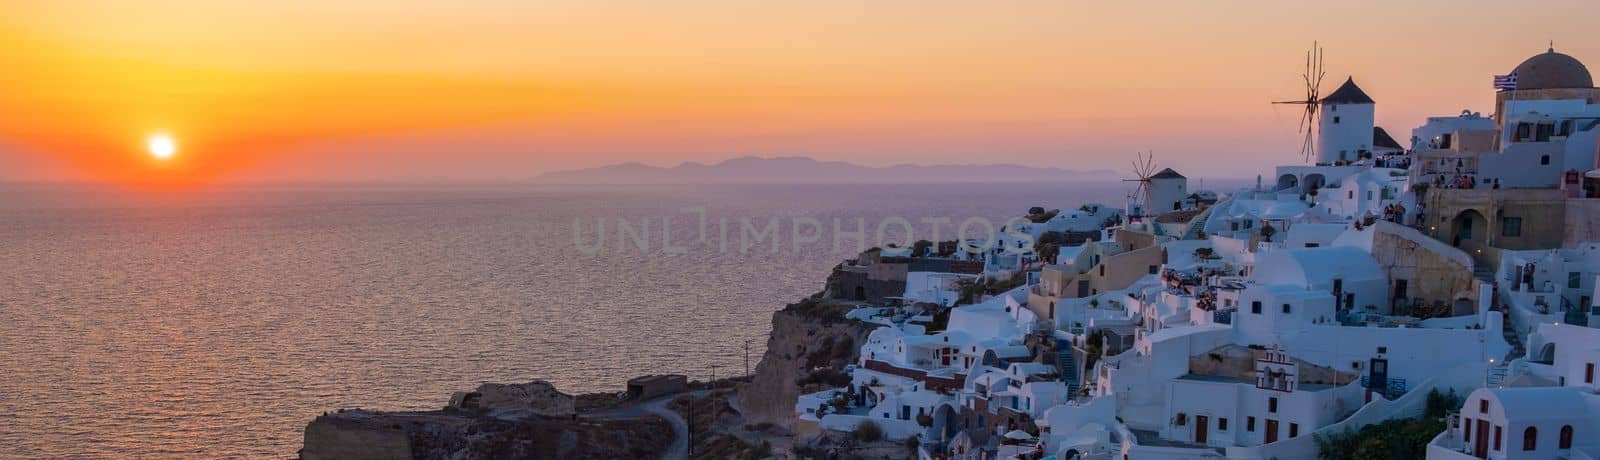 sunset with white churches an blue domes by the ocean of Oia Santorini Greece, a traditional Greek village in Santorini.